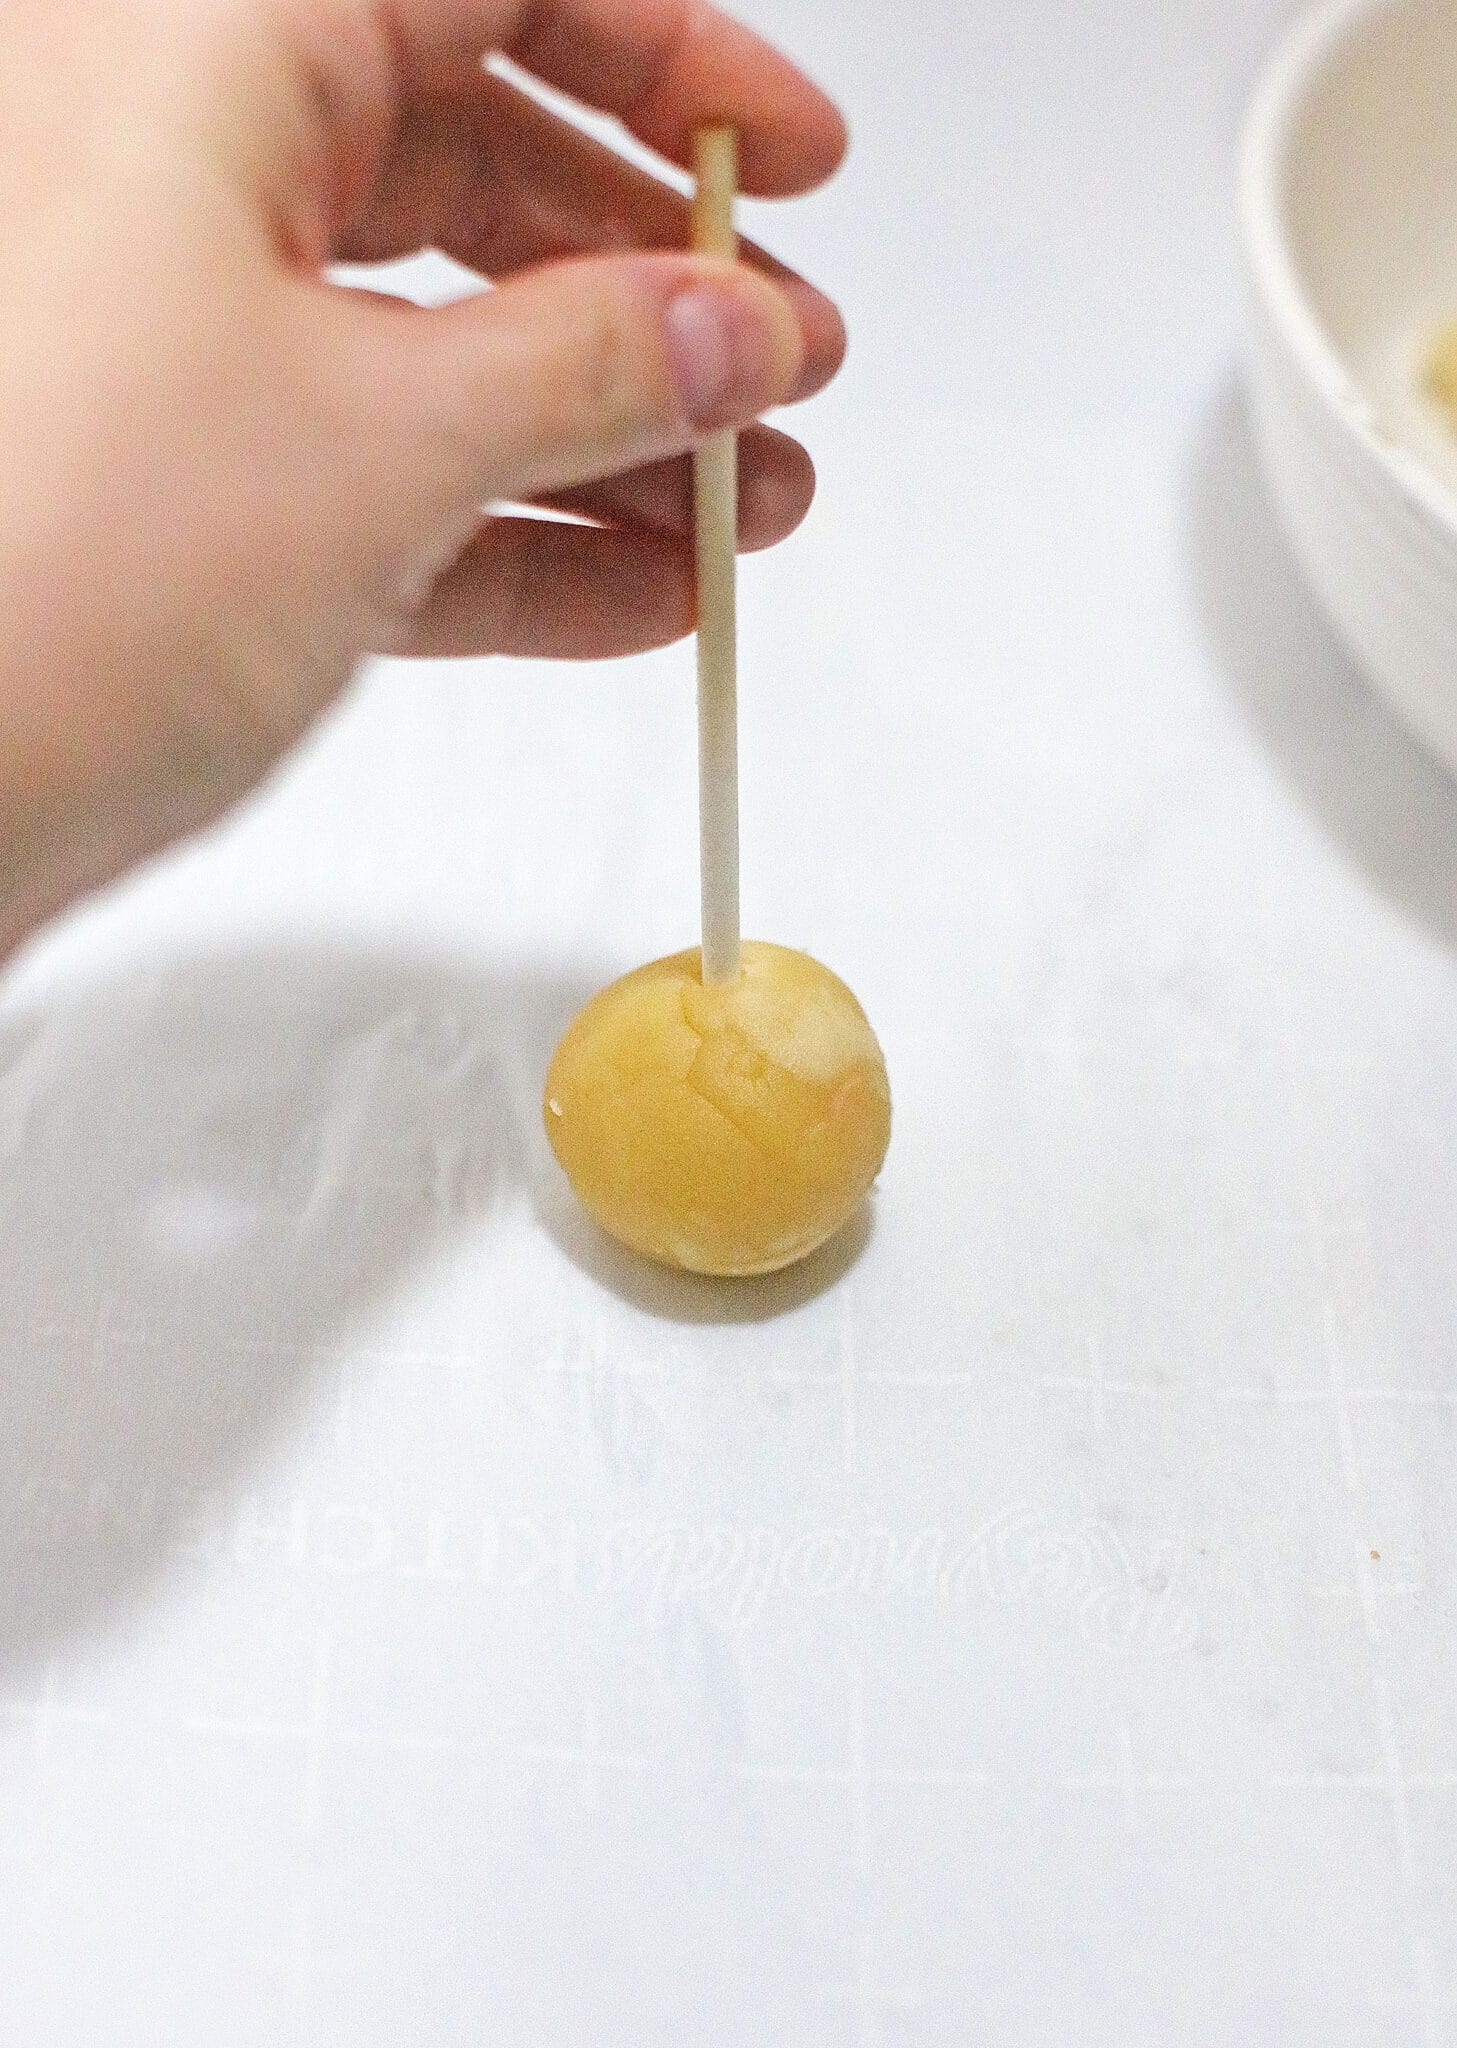 Placing the stick in the cake ball.